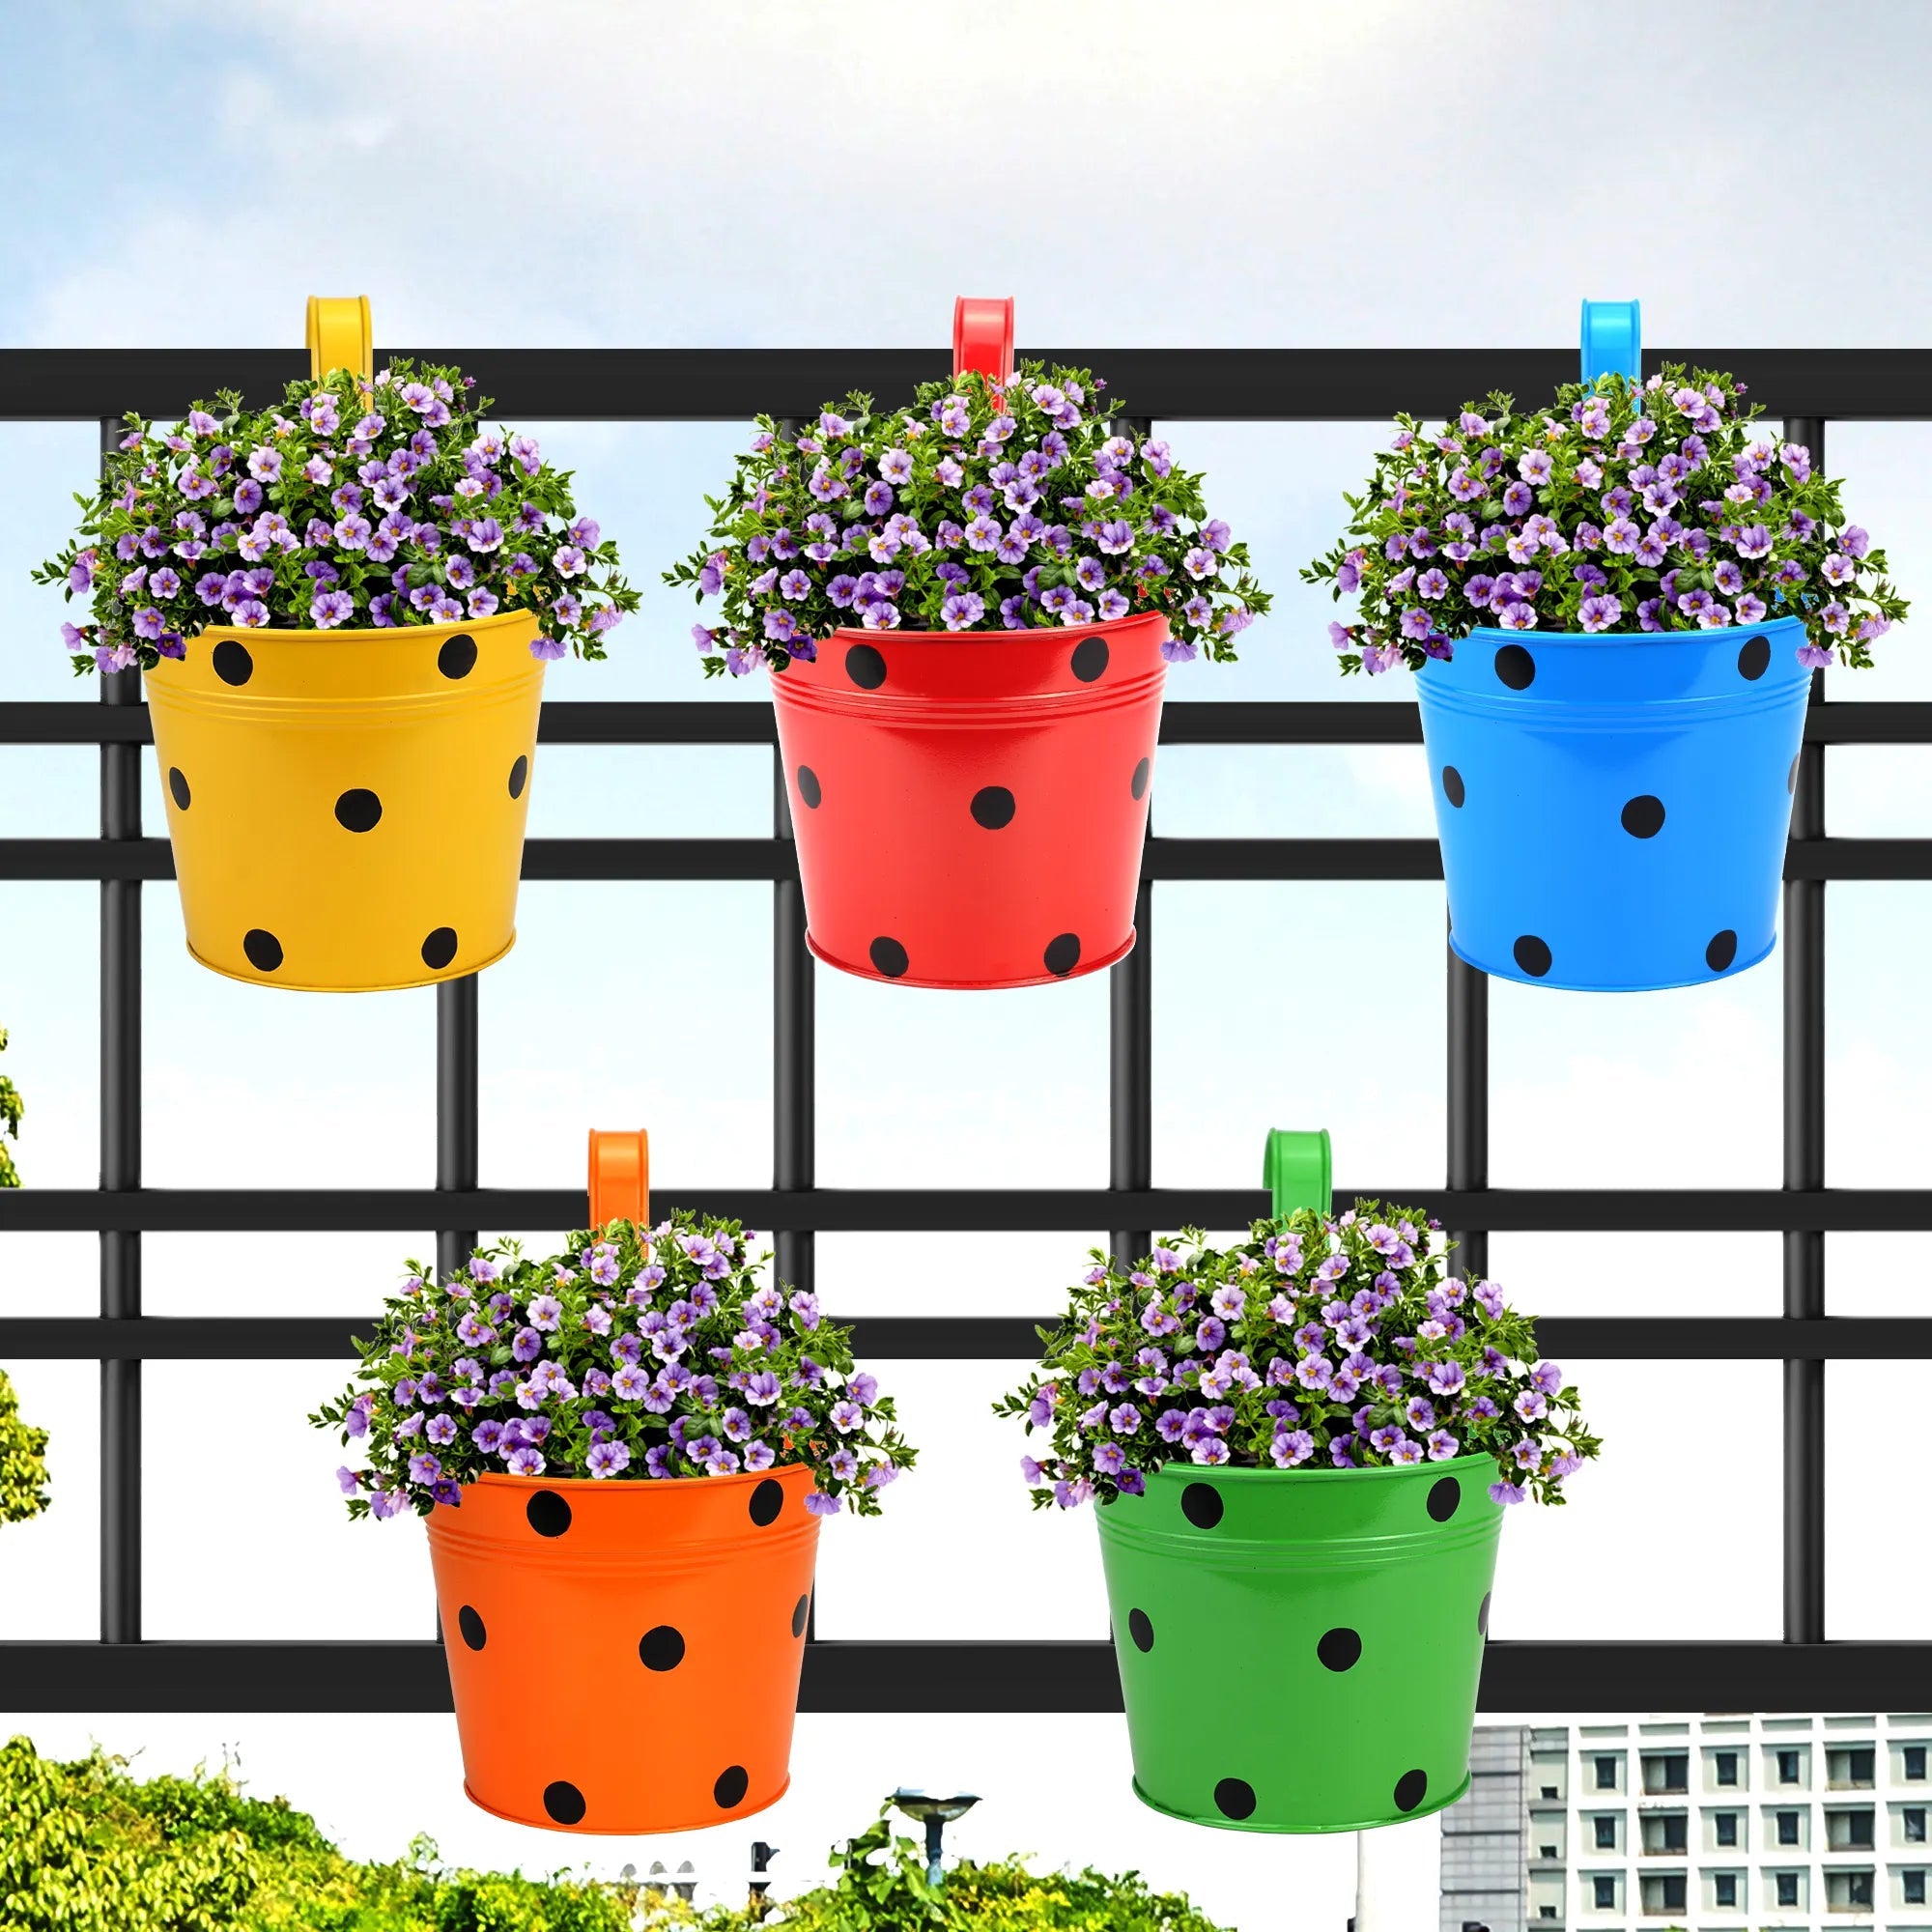  Amazing Creation Wall and Railing Hanging Planters